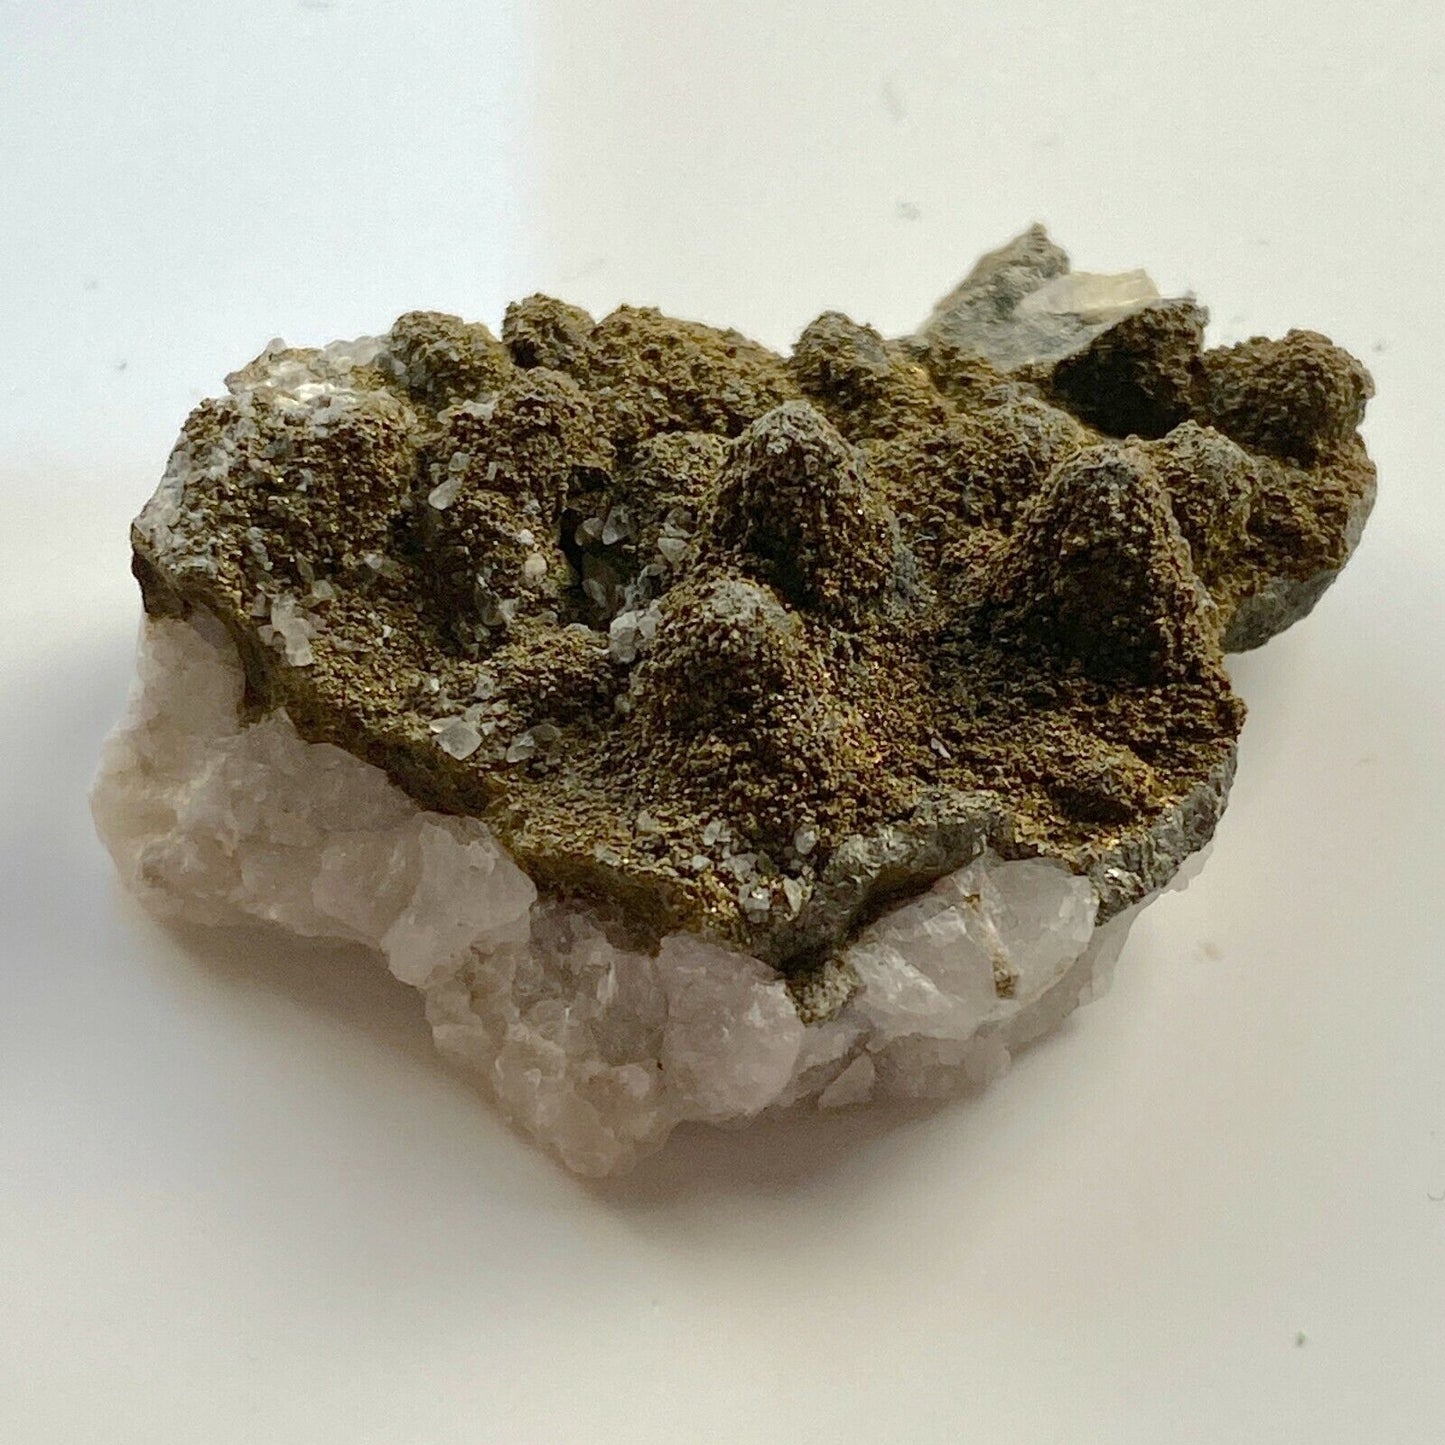 PYRITE EPIMORPH AFTER CALCITE FROM CHIPPING SODBURY, ENGLAND 16g. MF6364